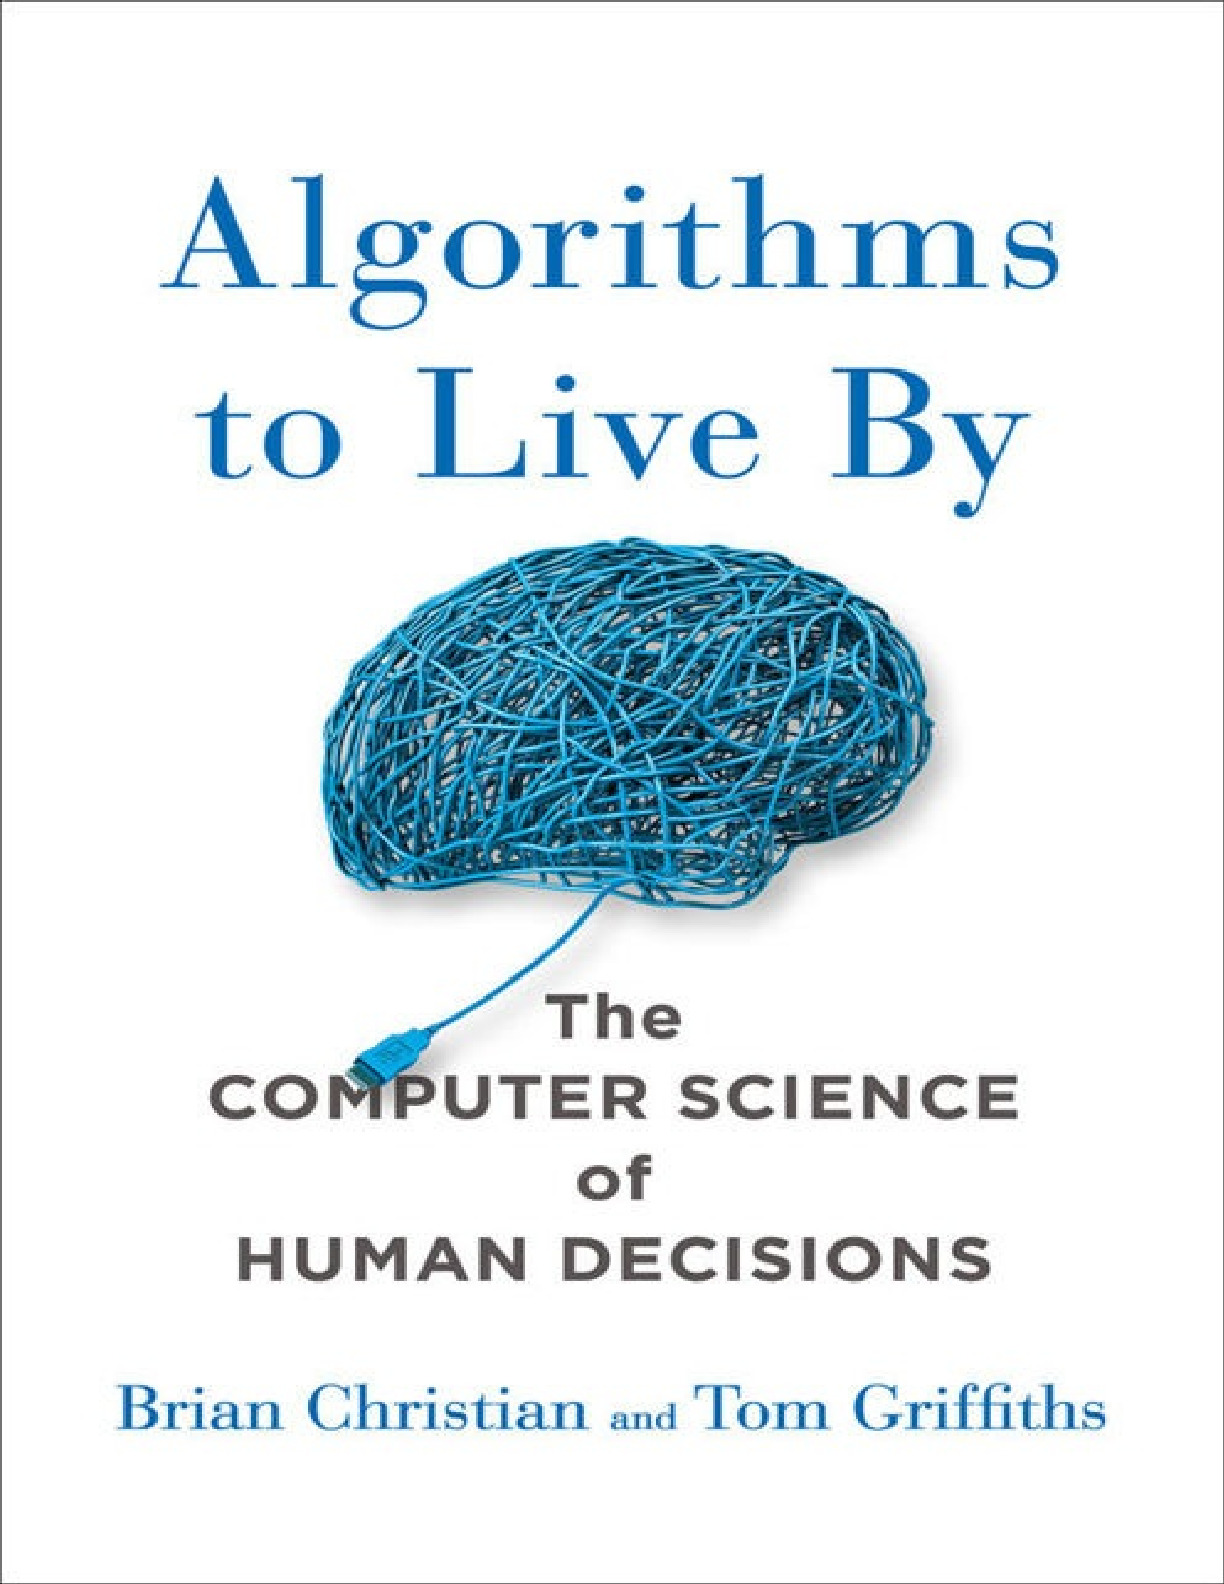 The Computer Science of Human Decisions